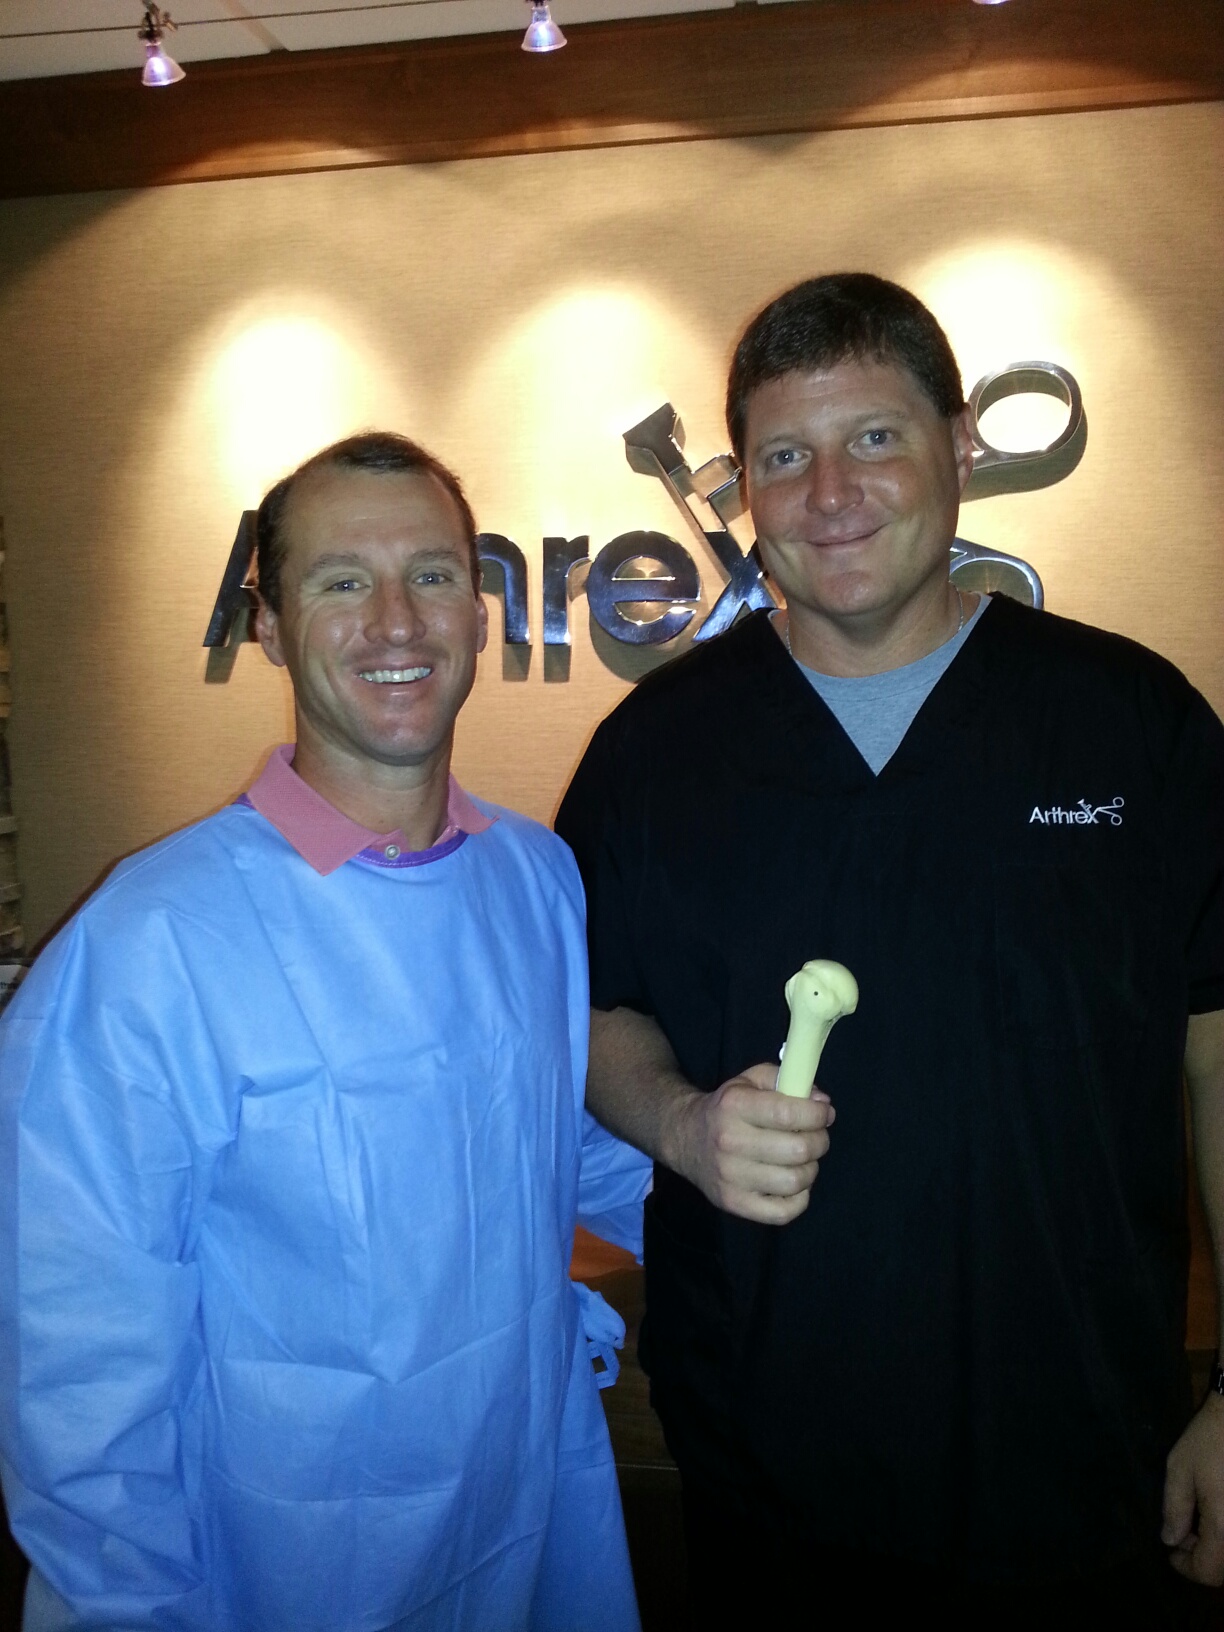 Photo with Allen Holowecky from Naples, Florida. Allen is senior engineer with Arthrex.